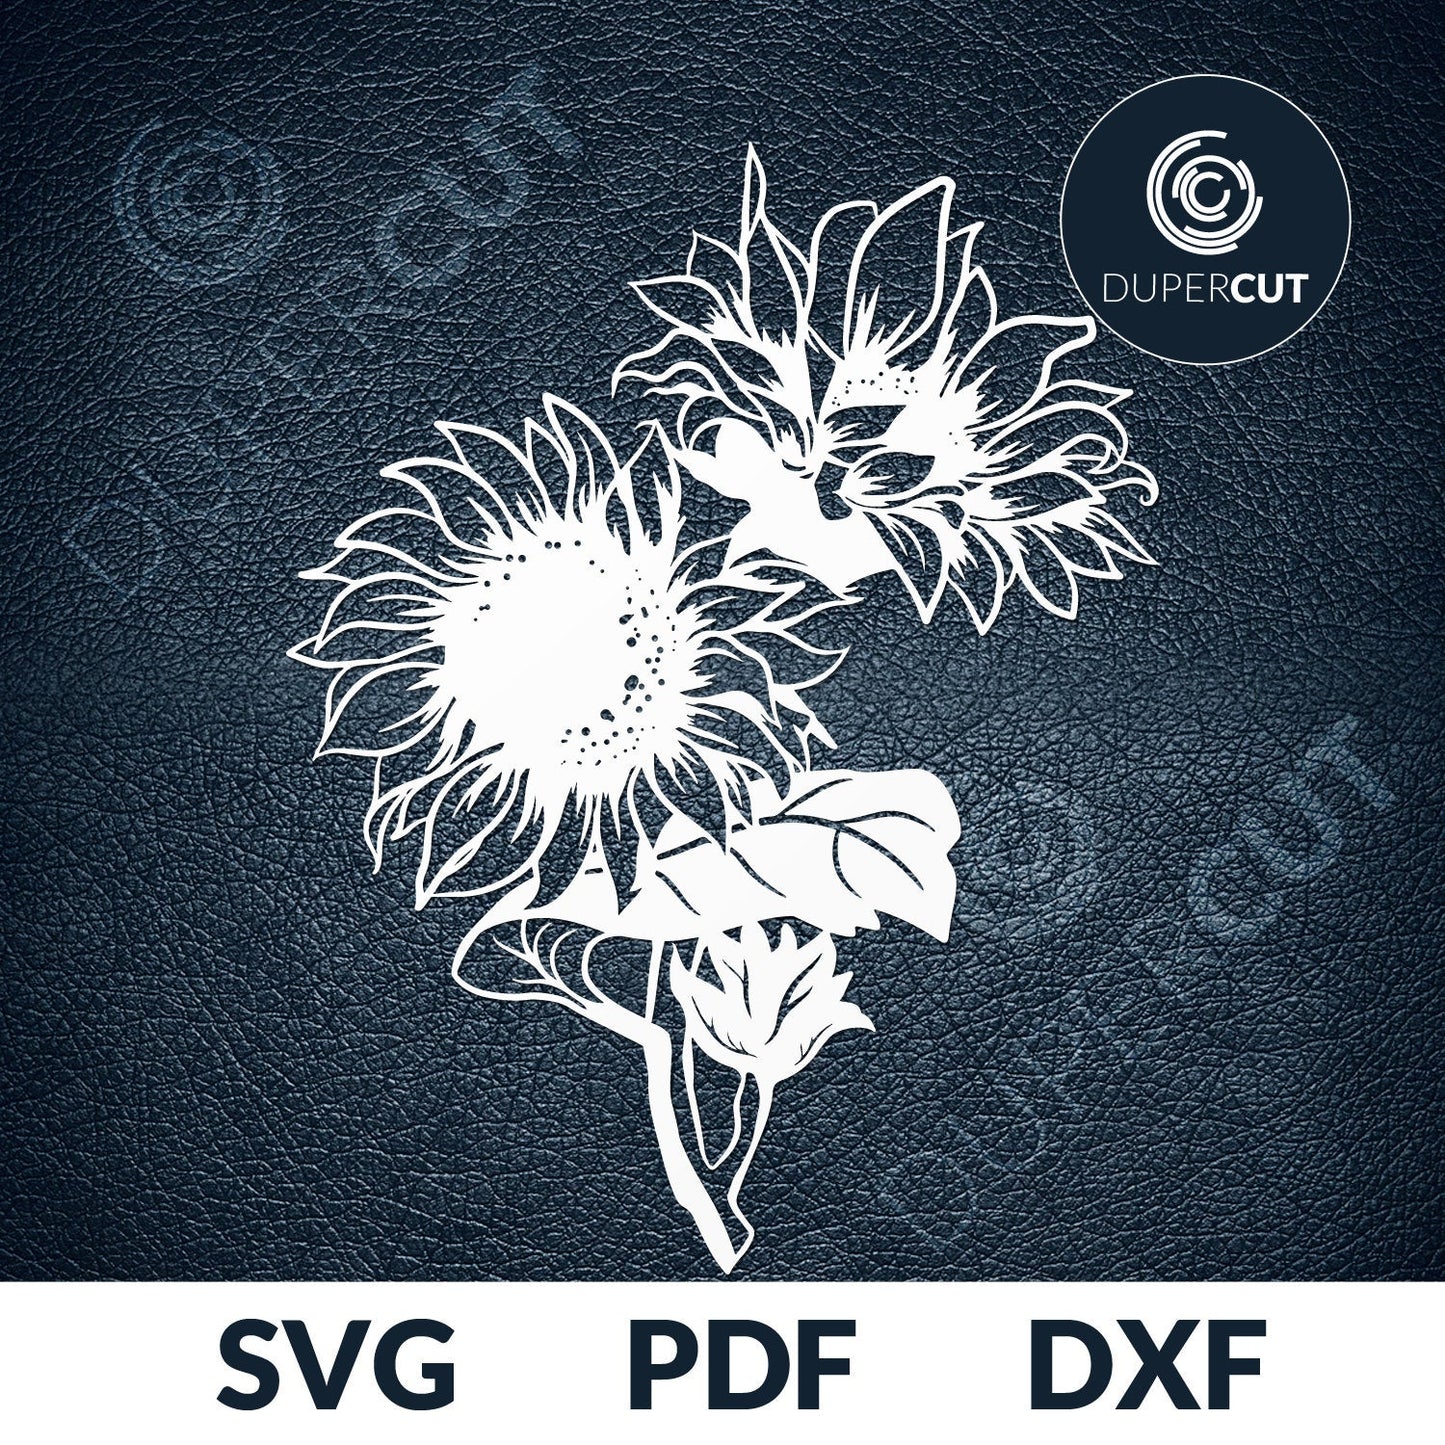 Sunflower bouquet vector line art, cutting  template - SVG DXF PNG files for Cricut, Glowforge, Silhouette Cameo, CNC Machines